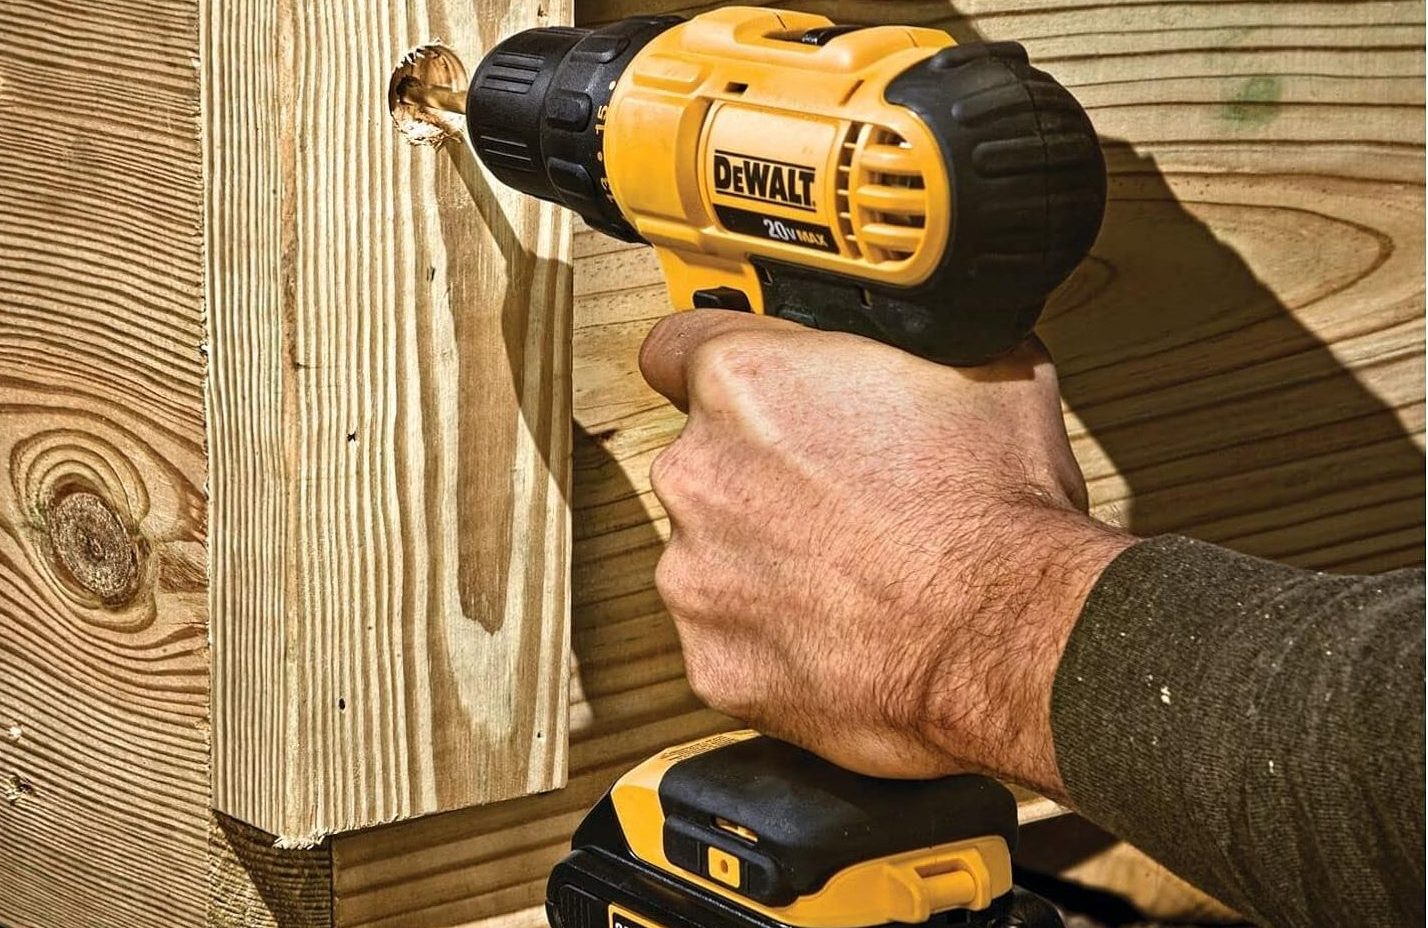 This best-selling Black and Decker Drill Kit is the lowest price